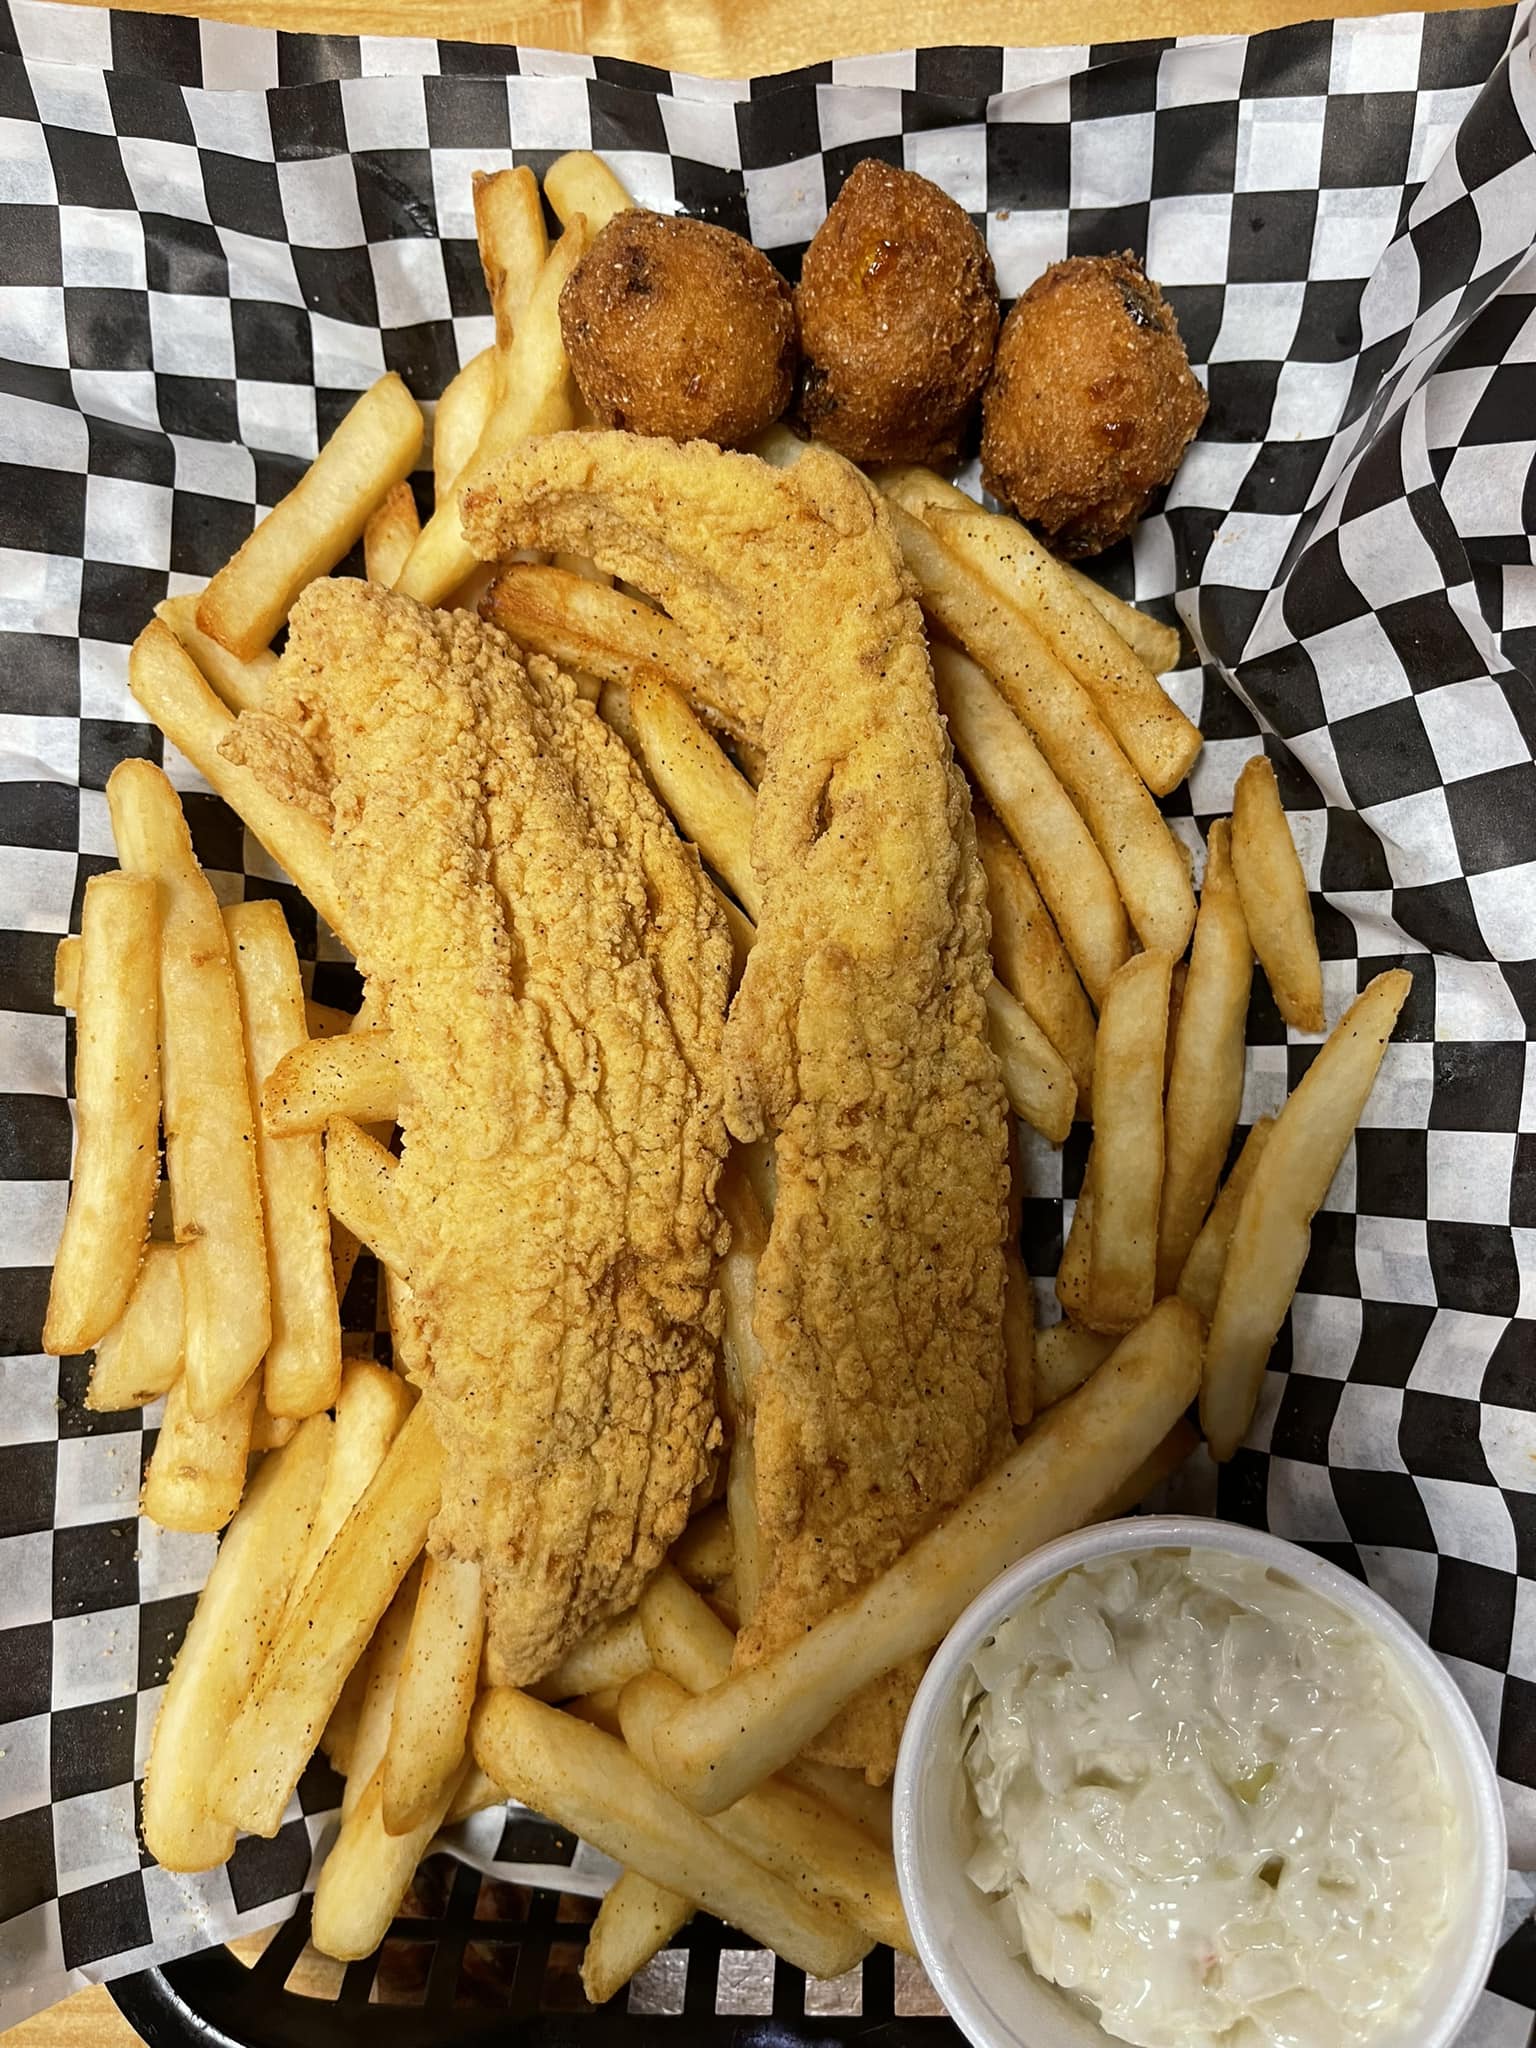 Fried Fish with french fries, hush puppies and coleslaw